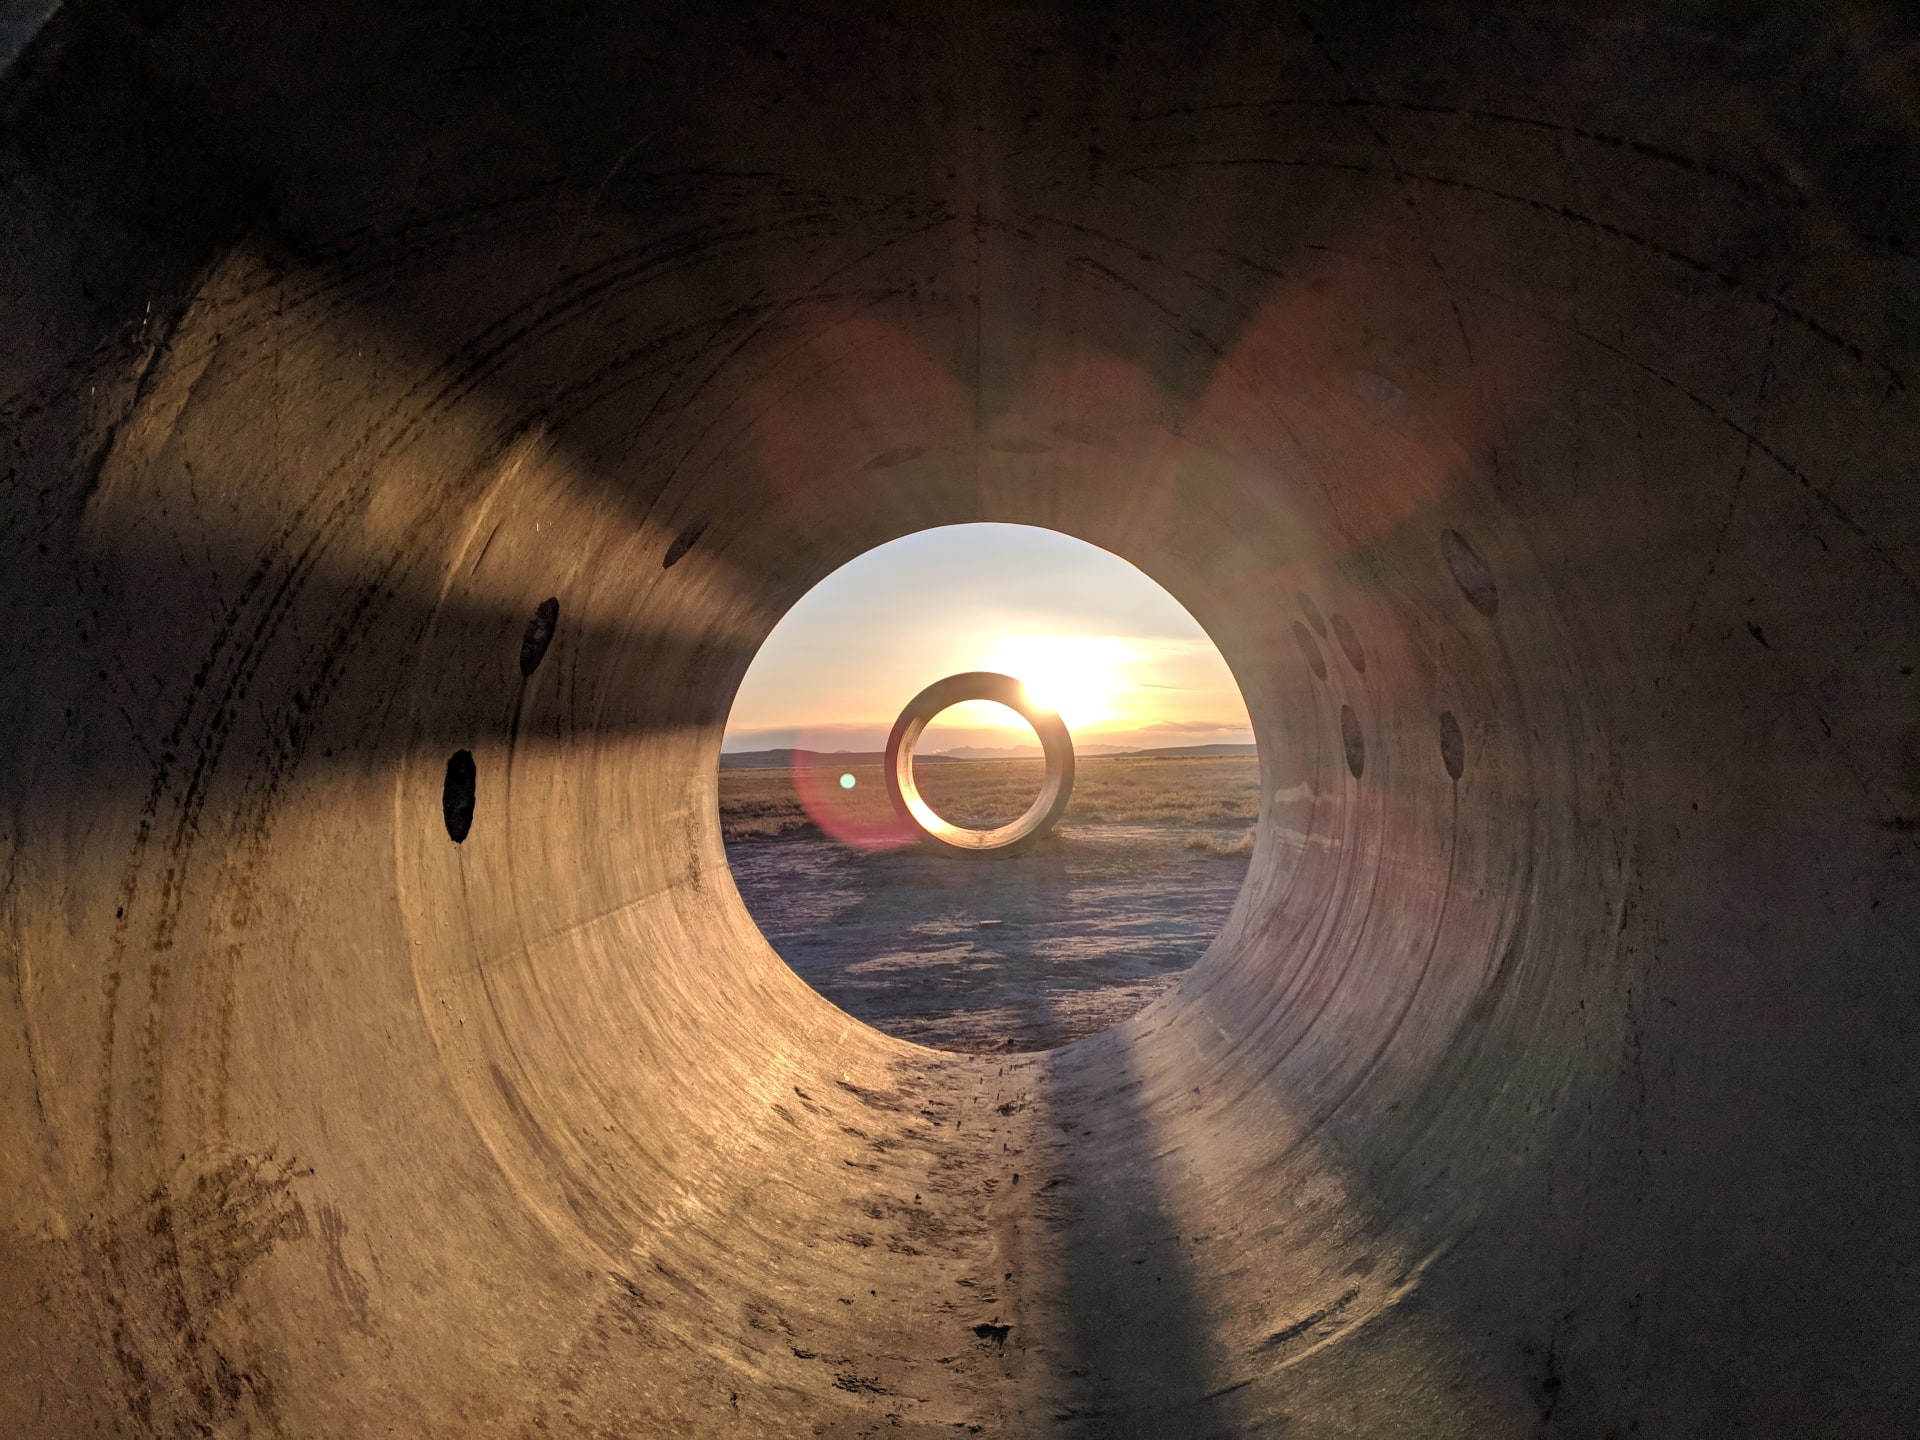 At the end of December, the cold morning sun realigns with the Tunnels.